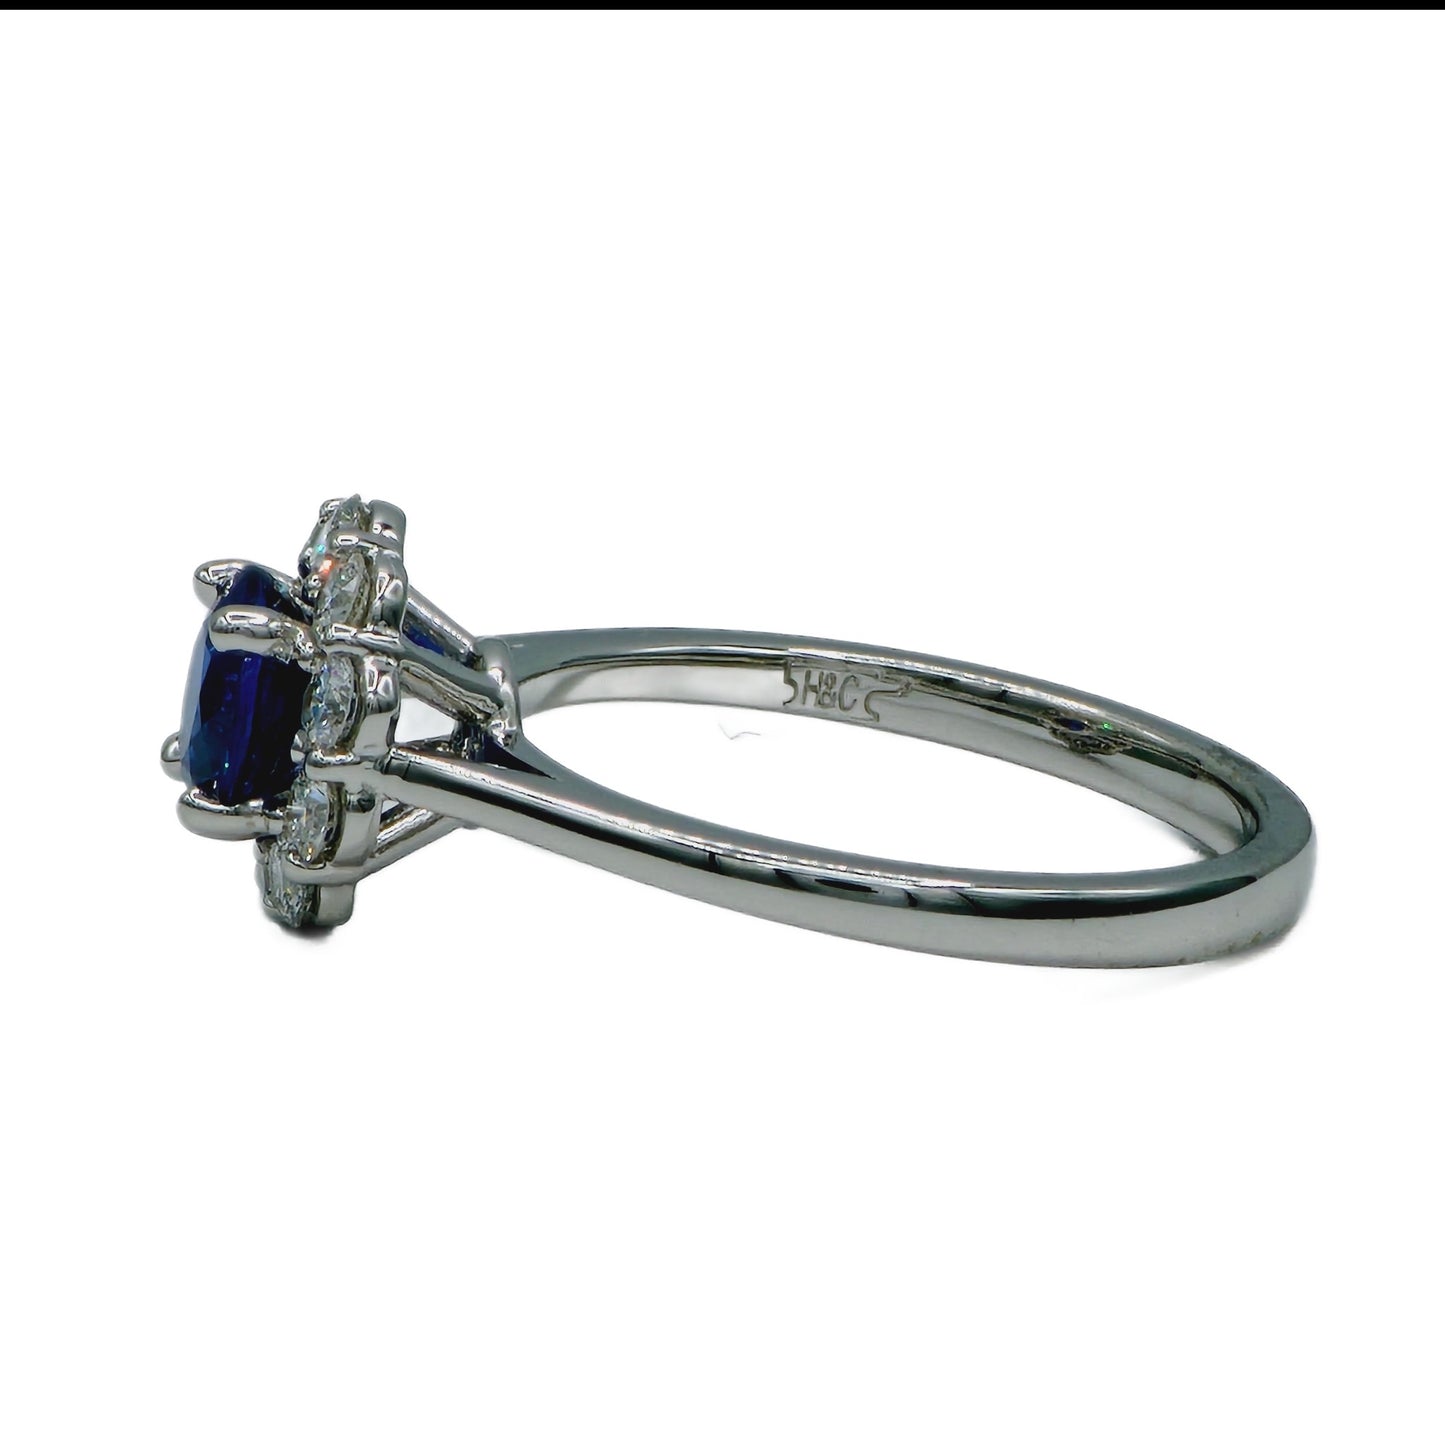 1.14 Carat Blue Sapphire and 10=0.50 Carat Diamond Ring in 14K White Gold